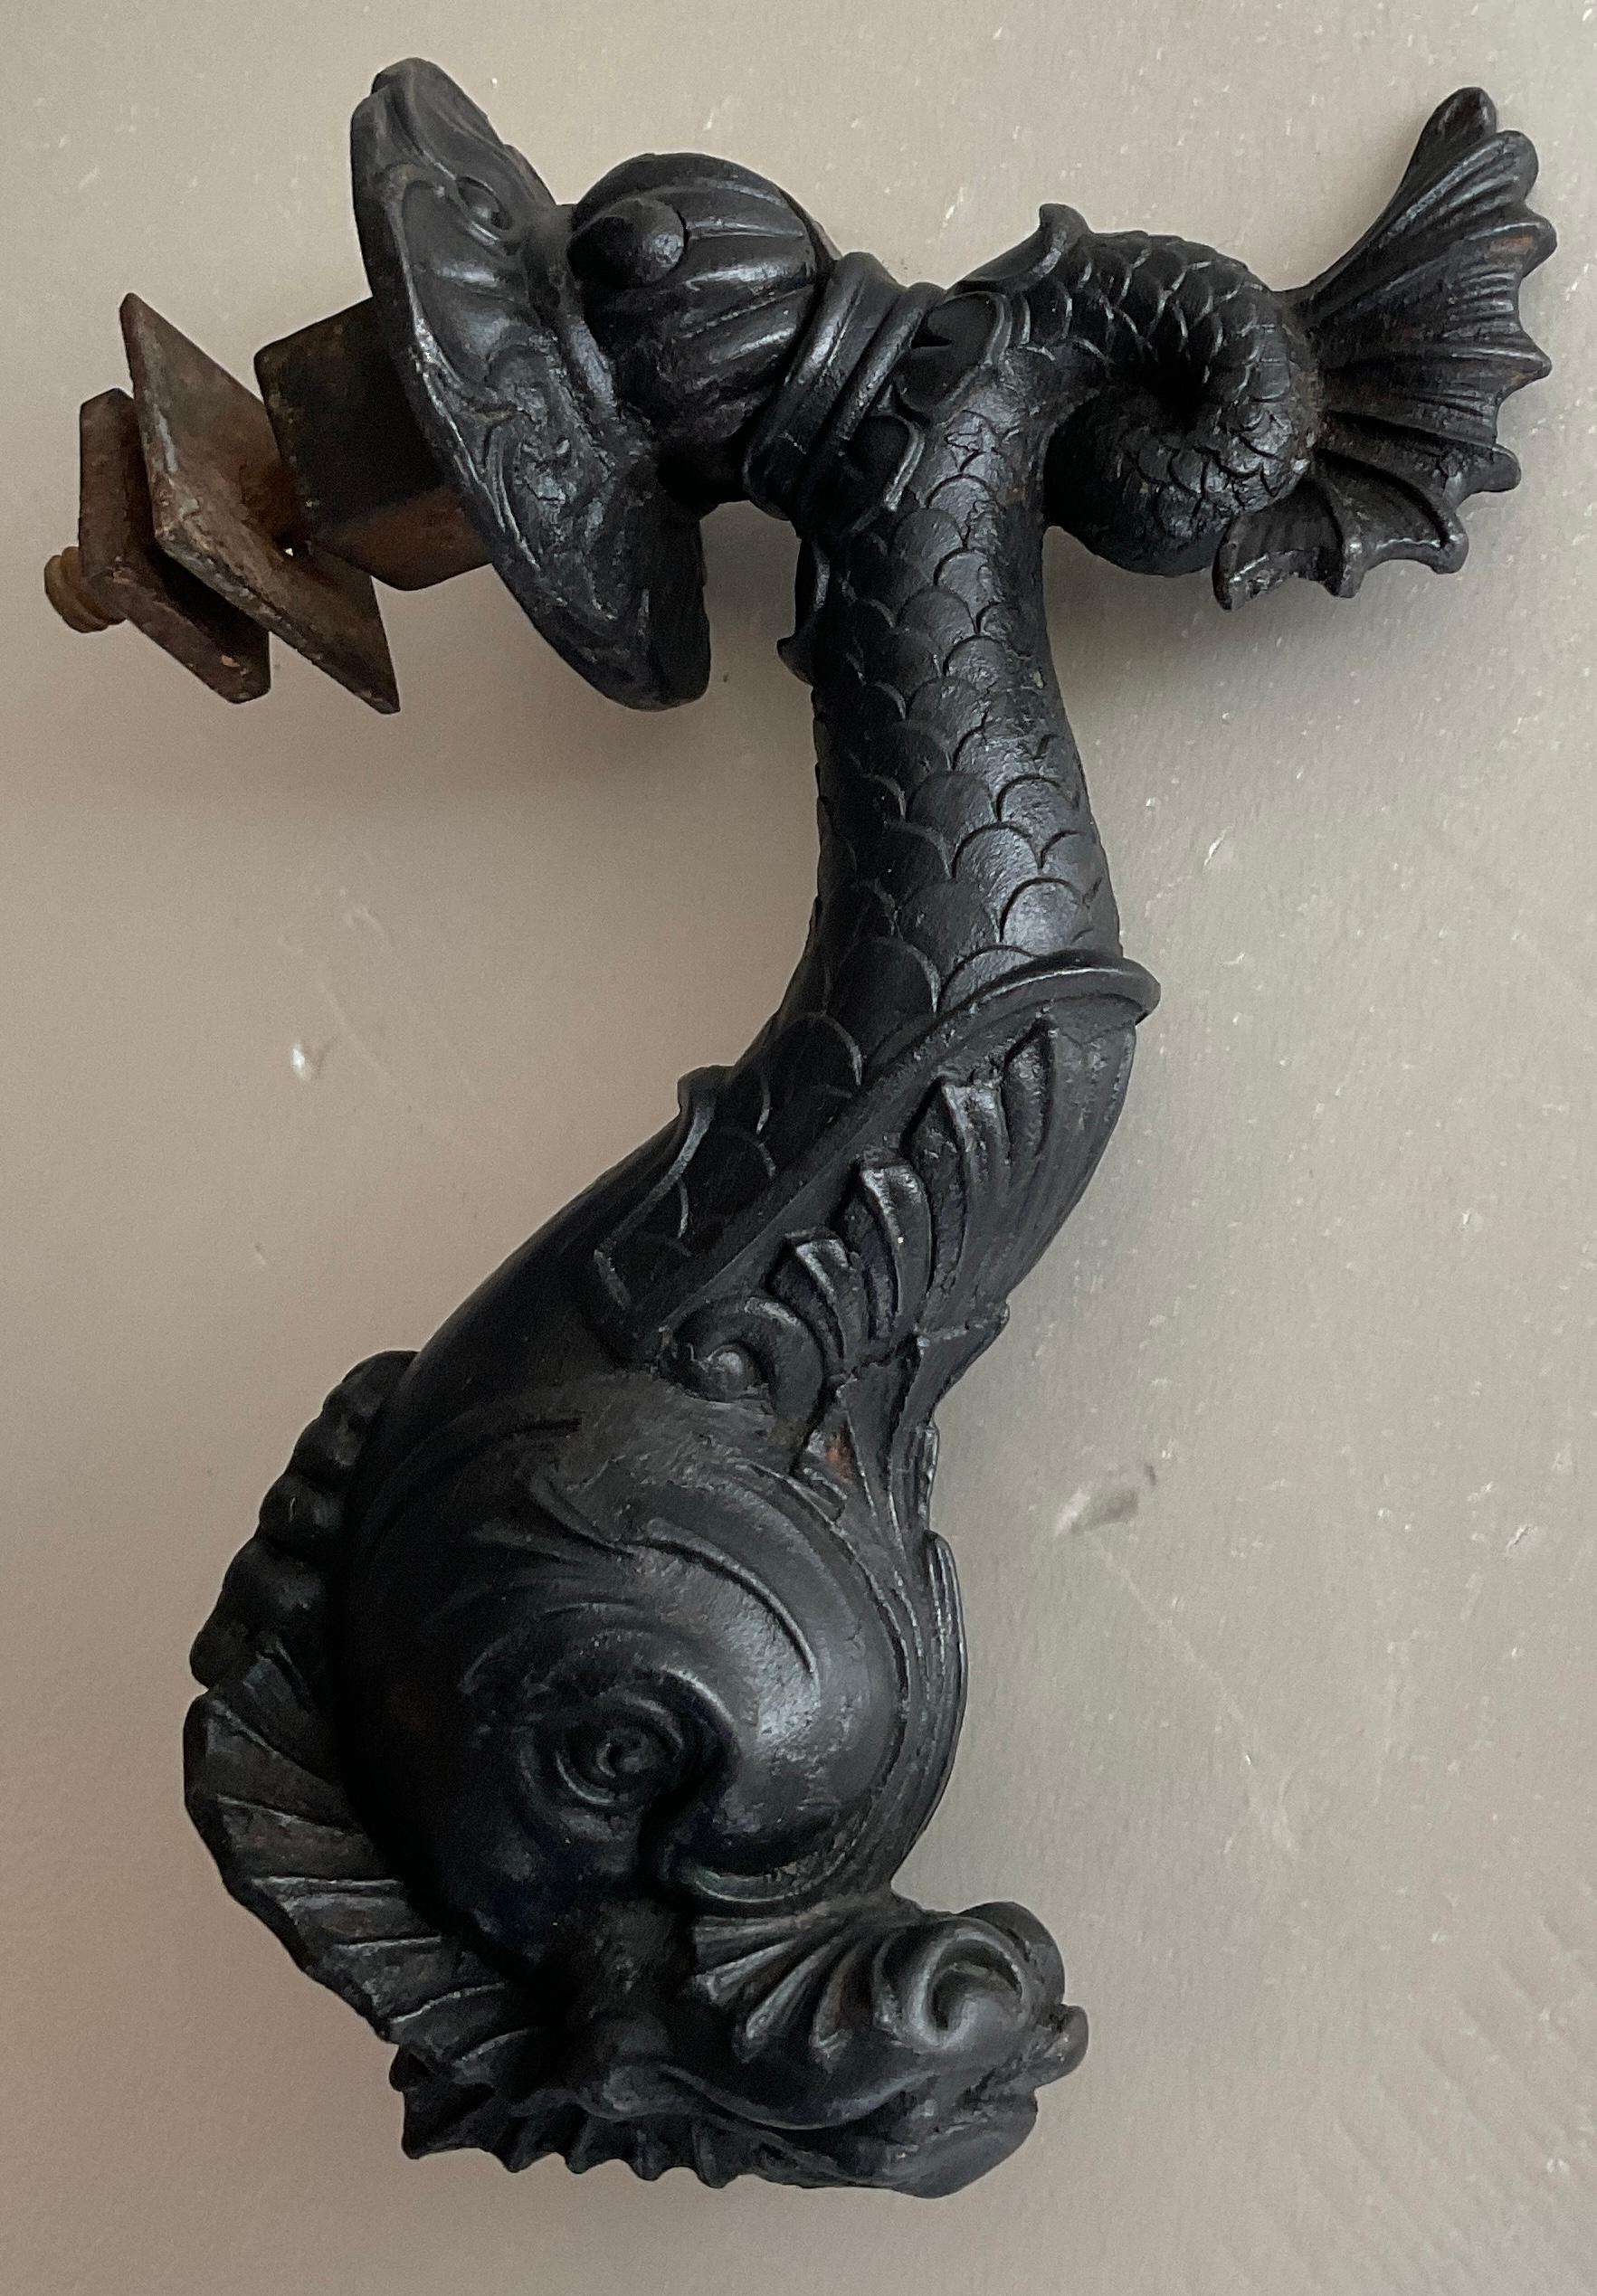 A fine quality French cast iron door knocker. The figure is a mythological dolphin with a fan shaped tail.

This original 19th Century door knocker will enhance any entrance door and will delight viewers.

Measures: 8